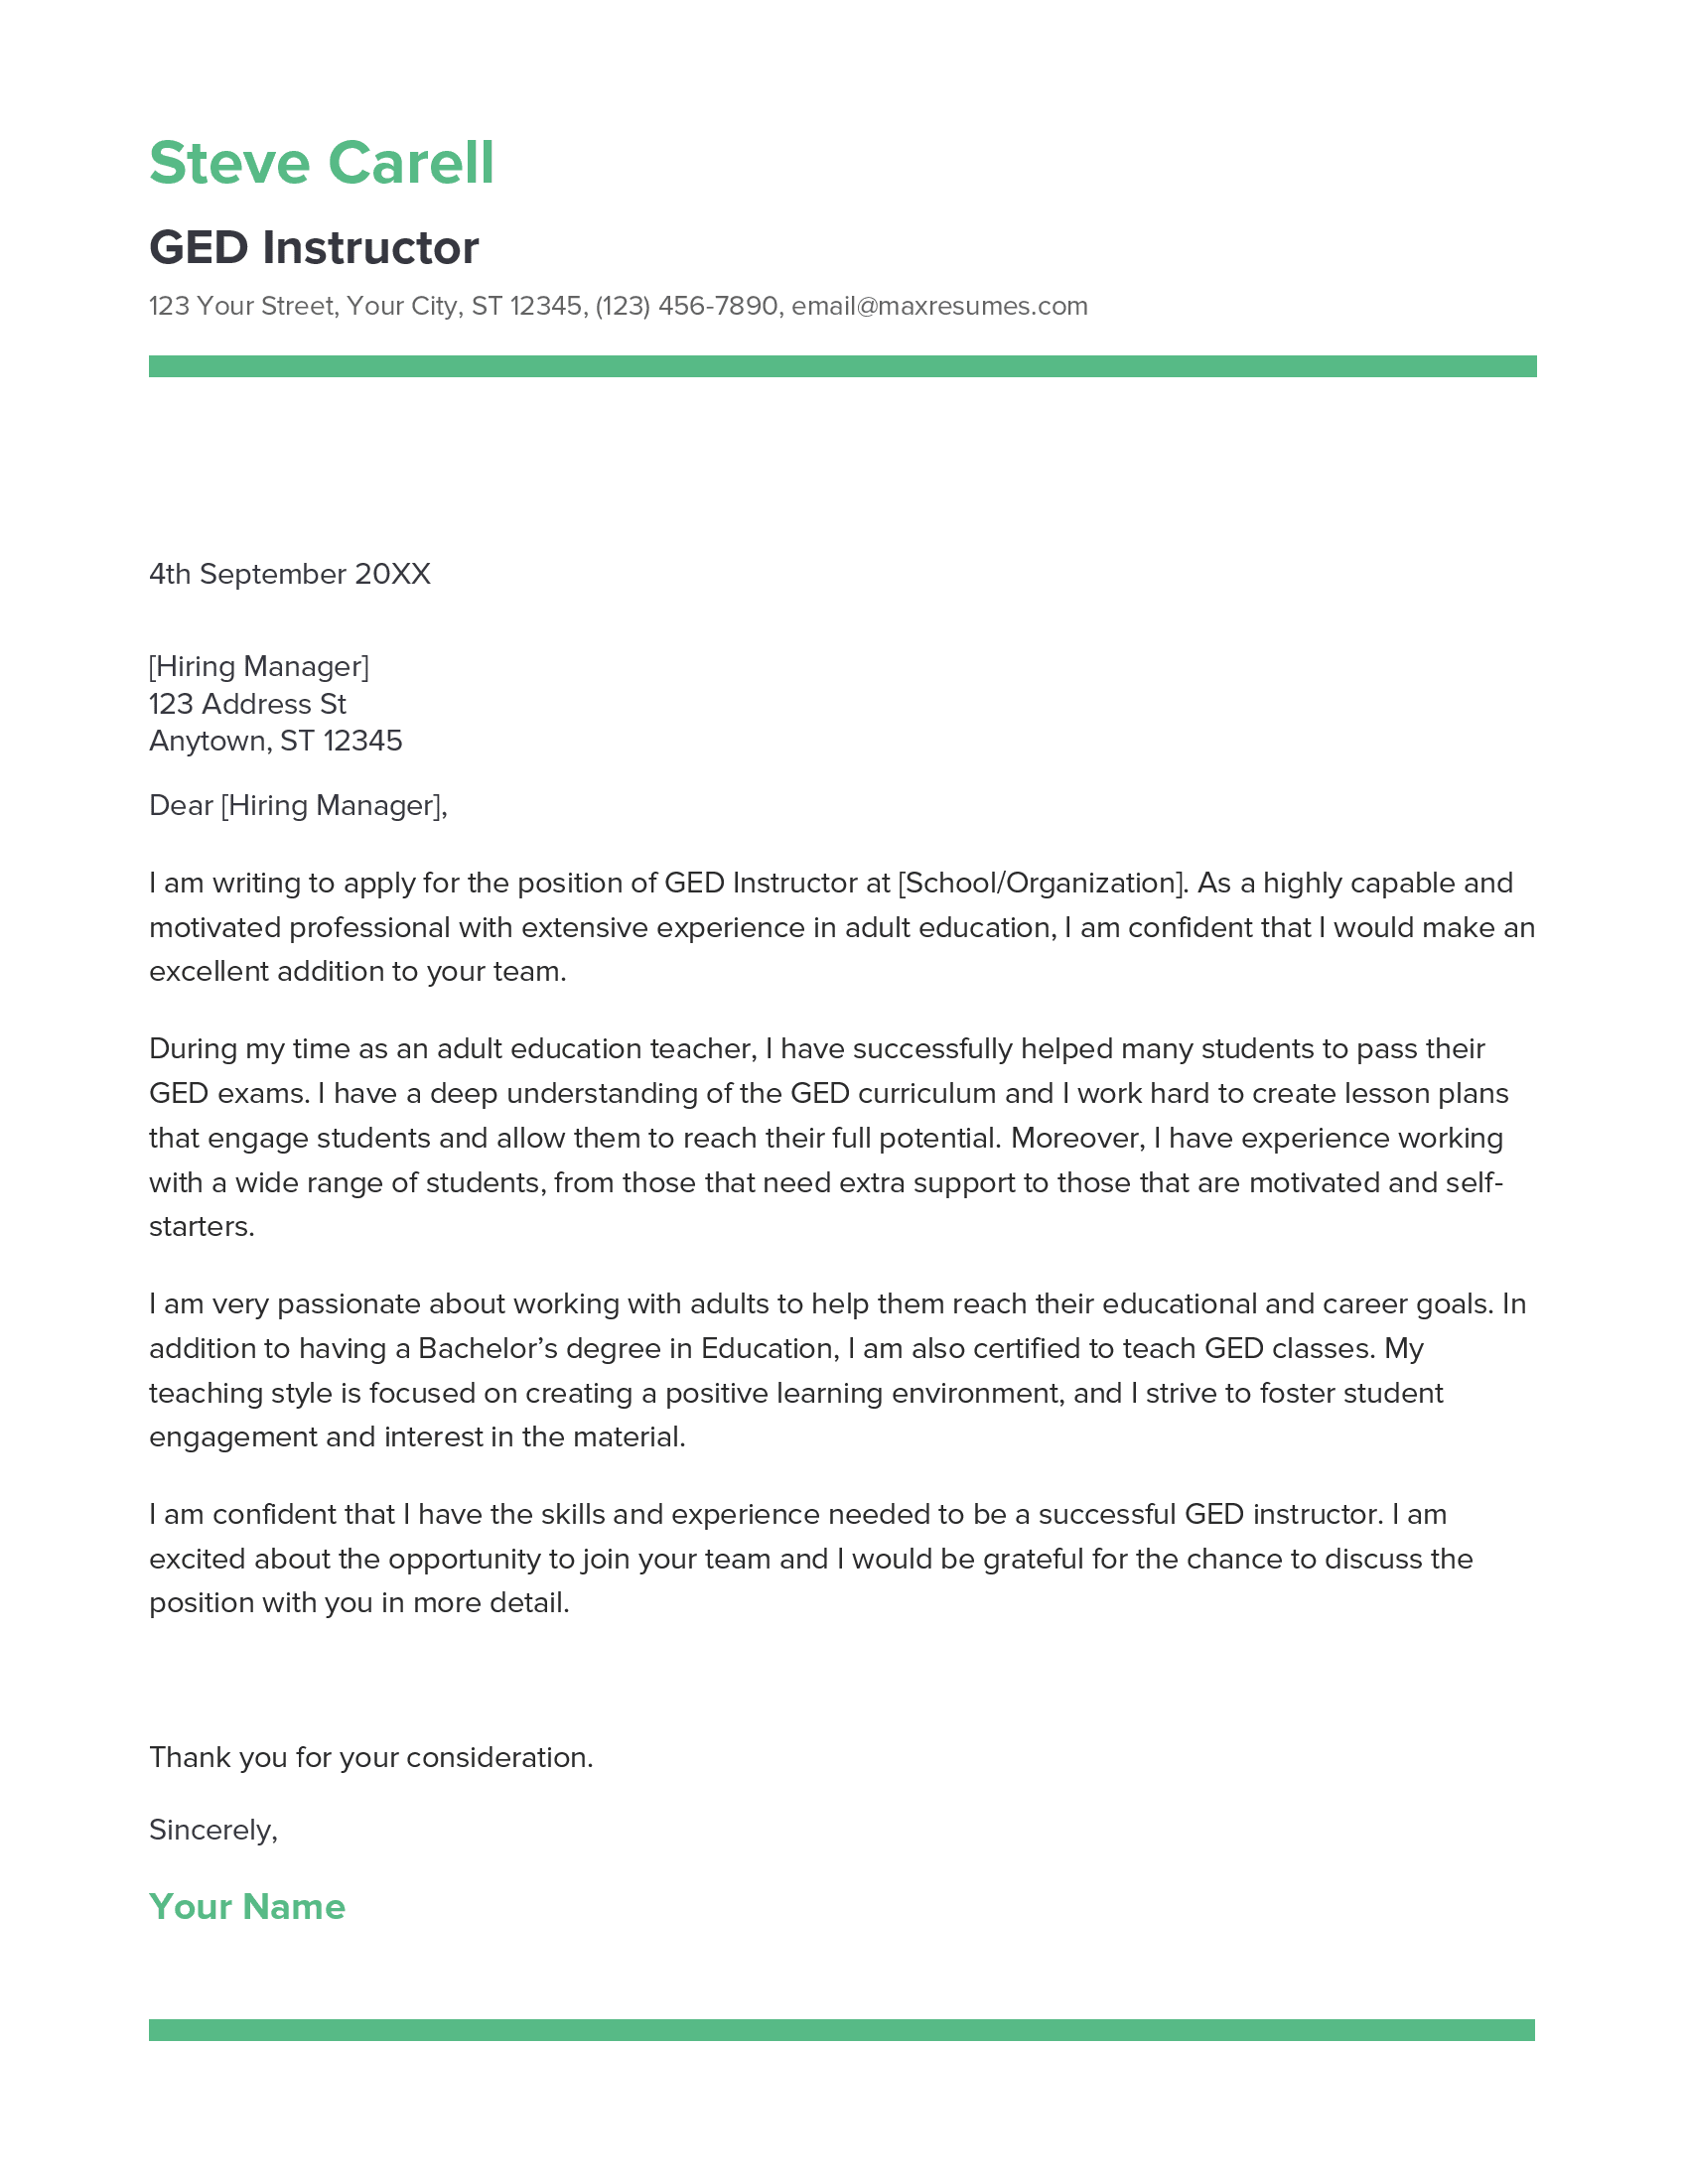 GED Instructor Cover Letter Example